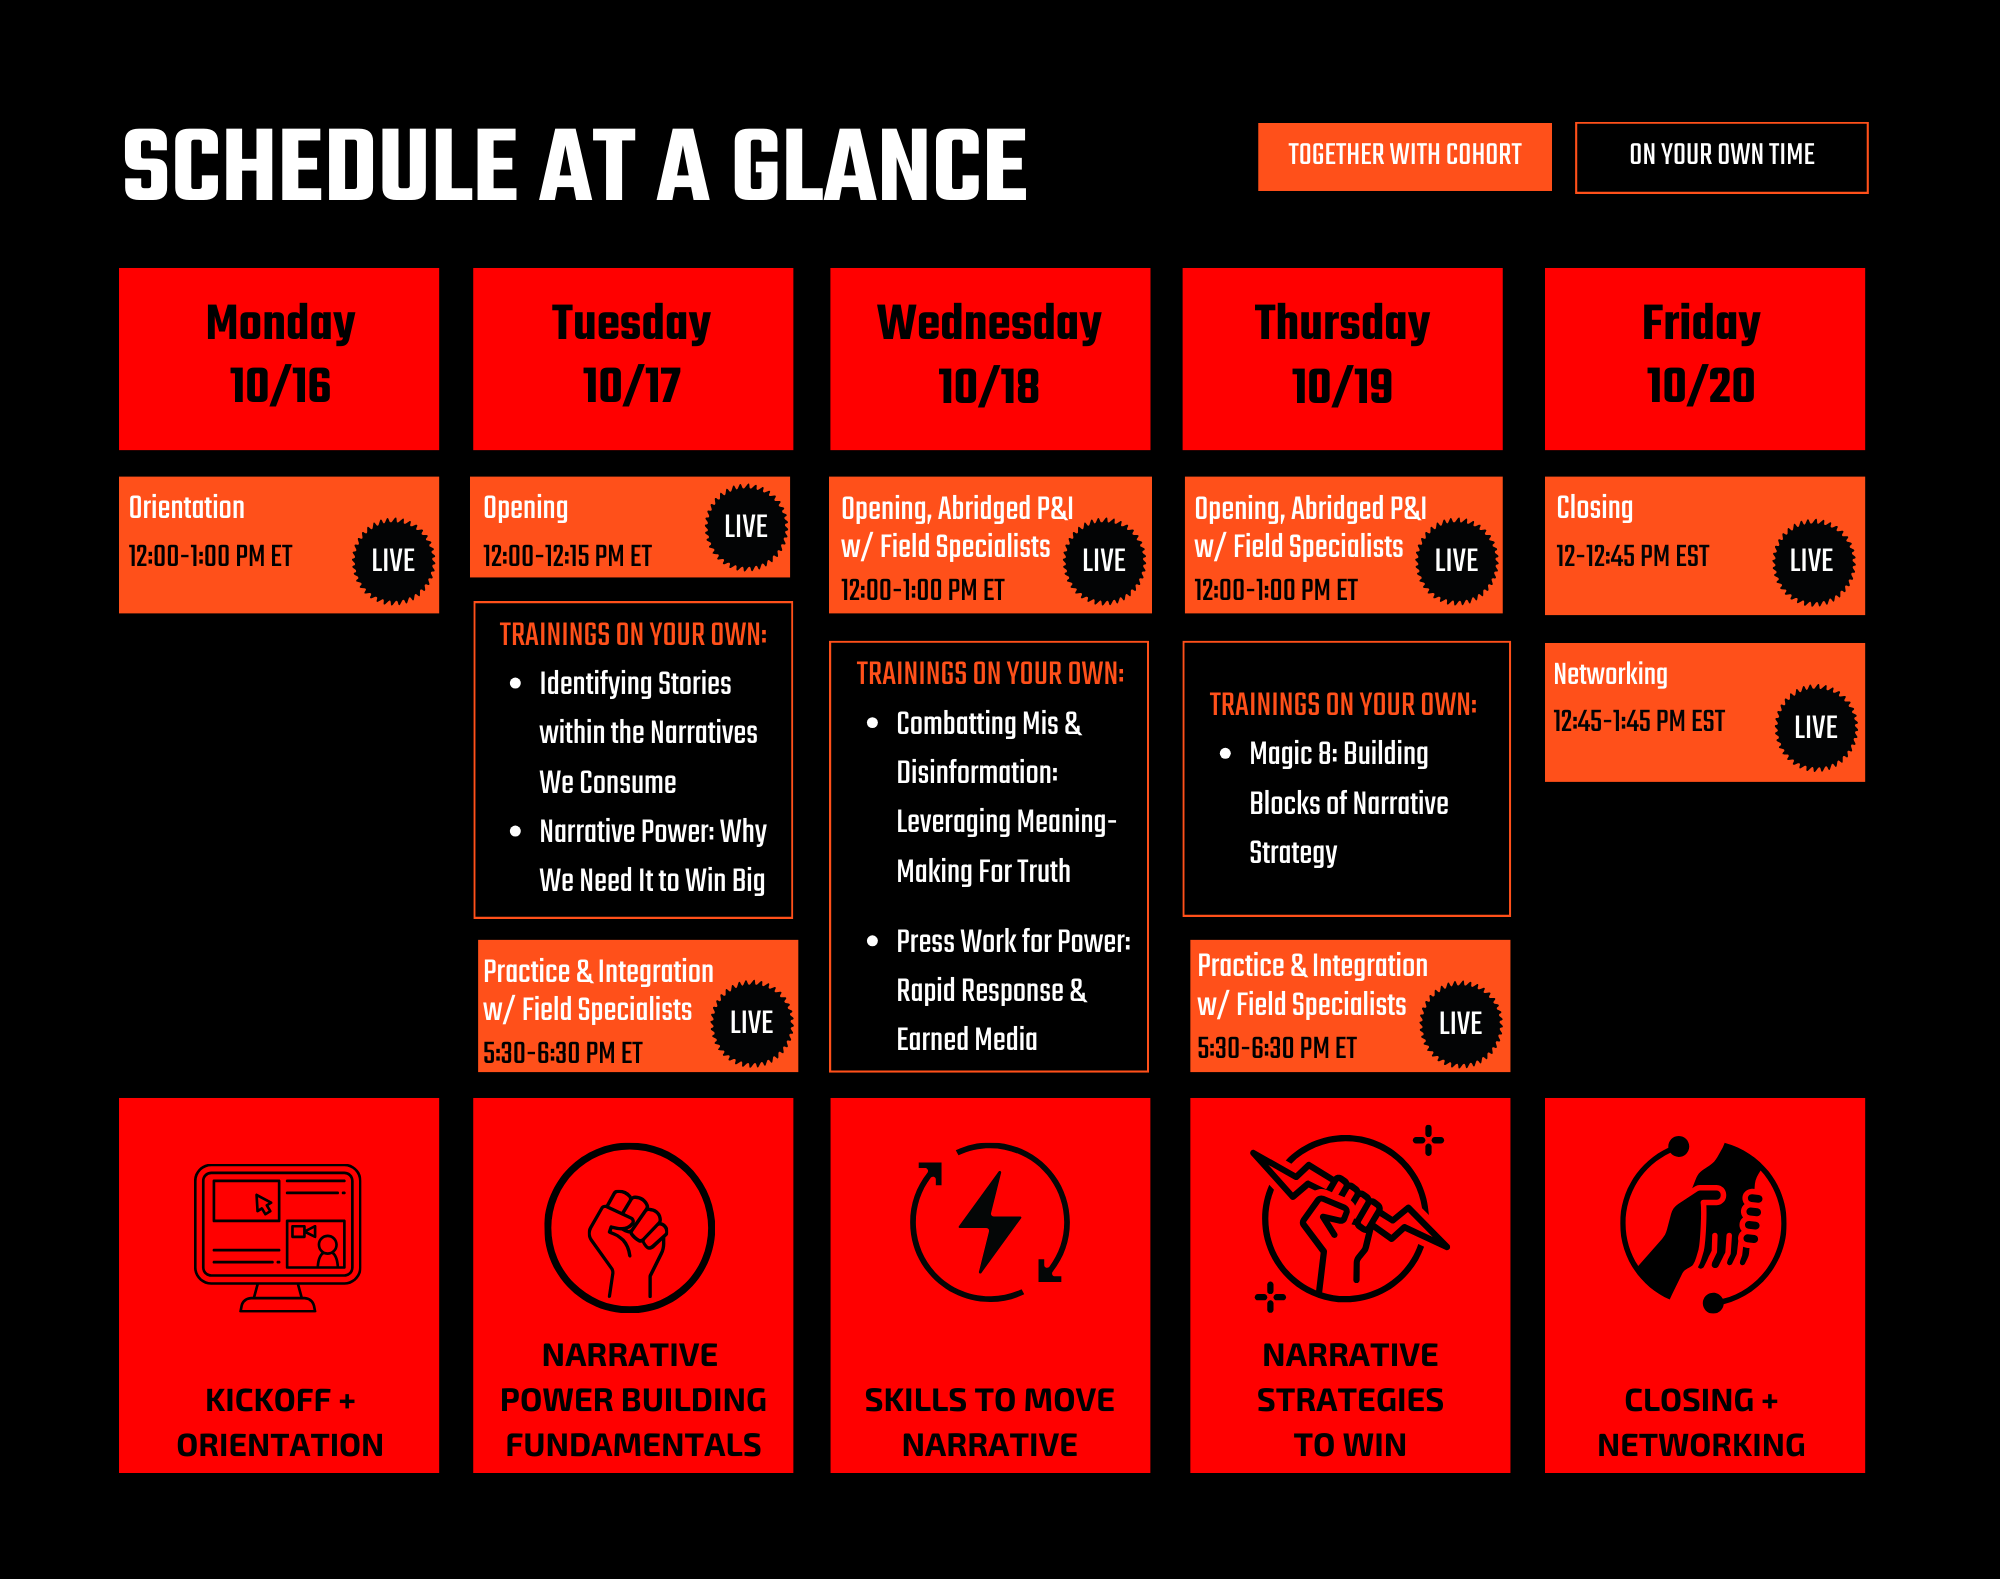 the virtual program schedule at a glance reading from left to right: Monday 10/16- Friday 10/20. On Monday 10/16 the virtual academy is scheduled to host an online kickoff and orientation from 12-1 PM ET. On tuesday 10/17 the academy will focus on narrative power building fundamentals and will have an opening & grounding from 12-12:15PM ET and an optional practice & integration session from 3:15-4:15pm ET. On Wednesday 10/18 the program consists of skills to move narratives with an agenda overview and abridged practice & integration session from 12-1pm ET. On Thursday 10/19 the program consists of narrative strategies to win with an agenda overview and abridged practice & integration session from 12-1PM ET and an optional practice & integration session from 2:30-3:30PM ET. On Friday 10/20 the program host a virtual closing session from 12 - 12:45 PM ET and a networking mixer from 12:45 PM ET - 1 PM ET. 